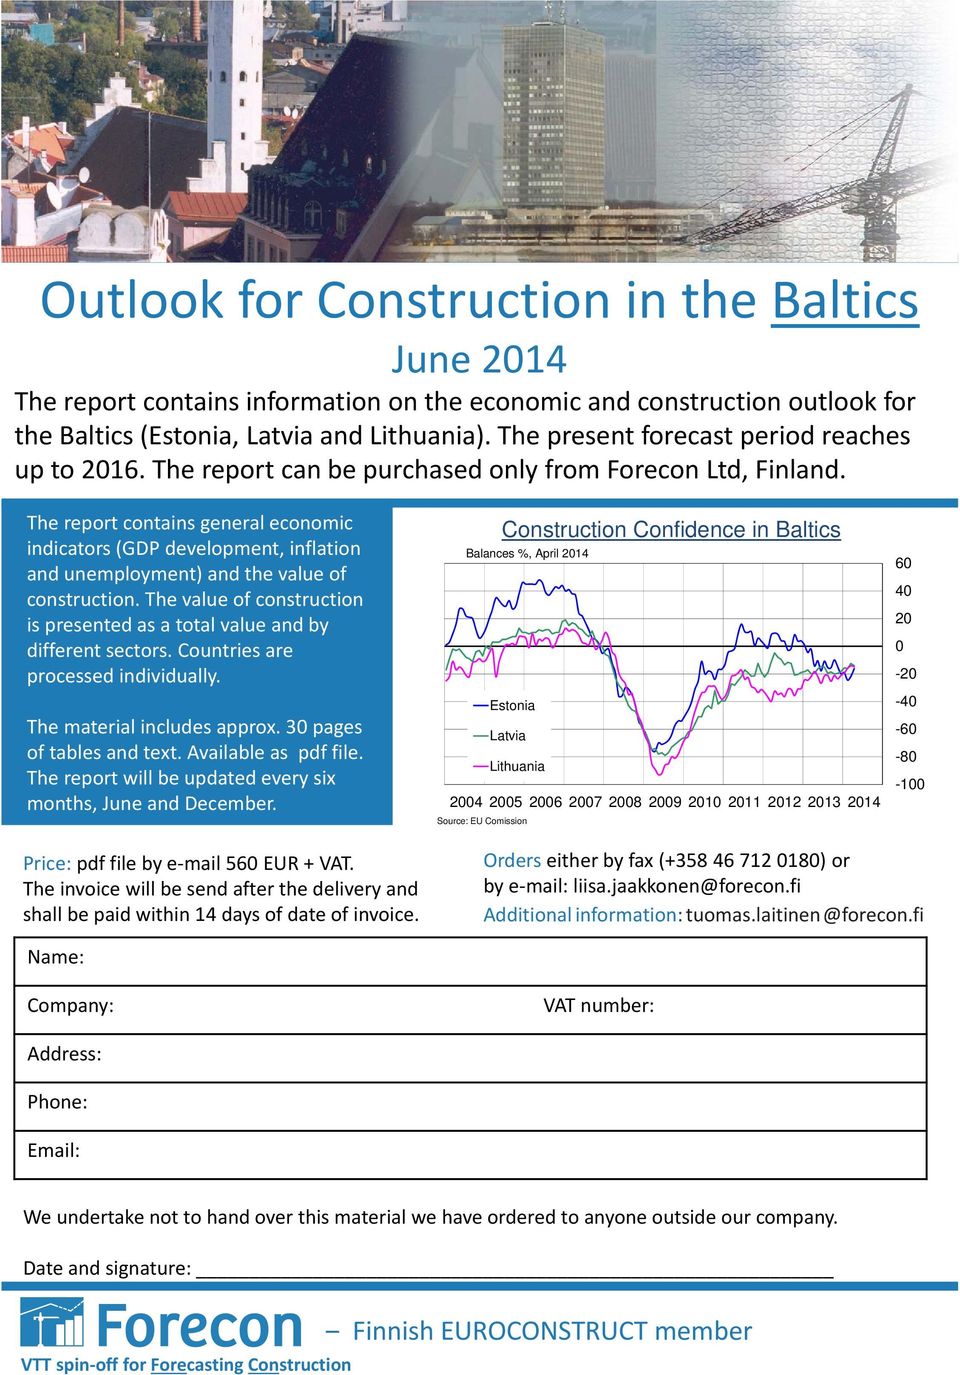 The report contains general economic indicators (GDP development, inflation and unemployment) and the value of construction.